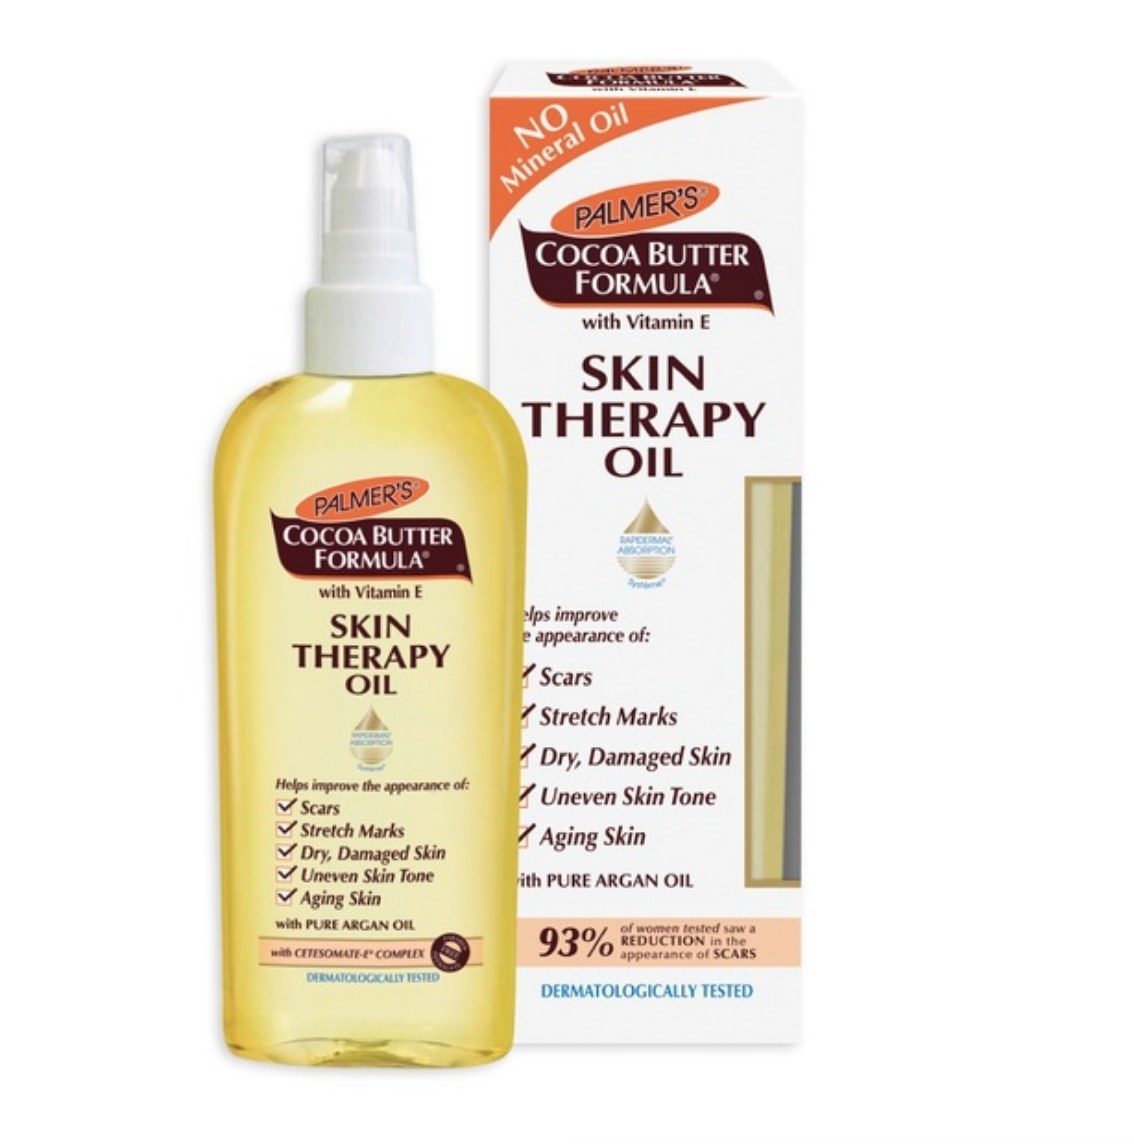 A bottle of skin therapy oil